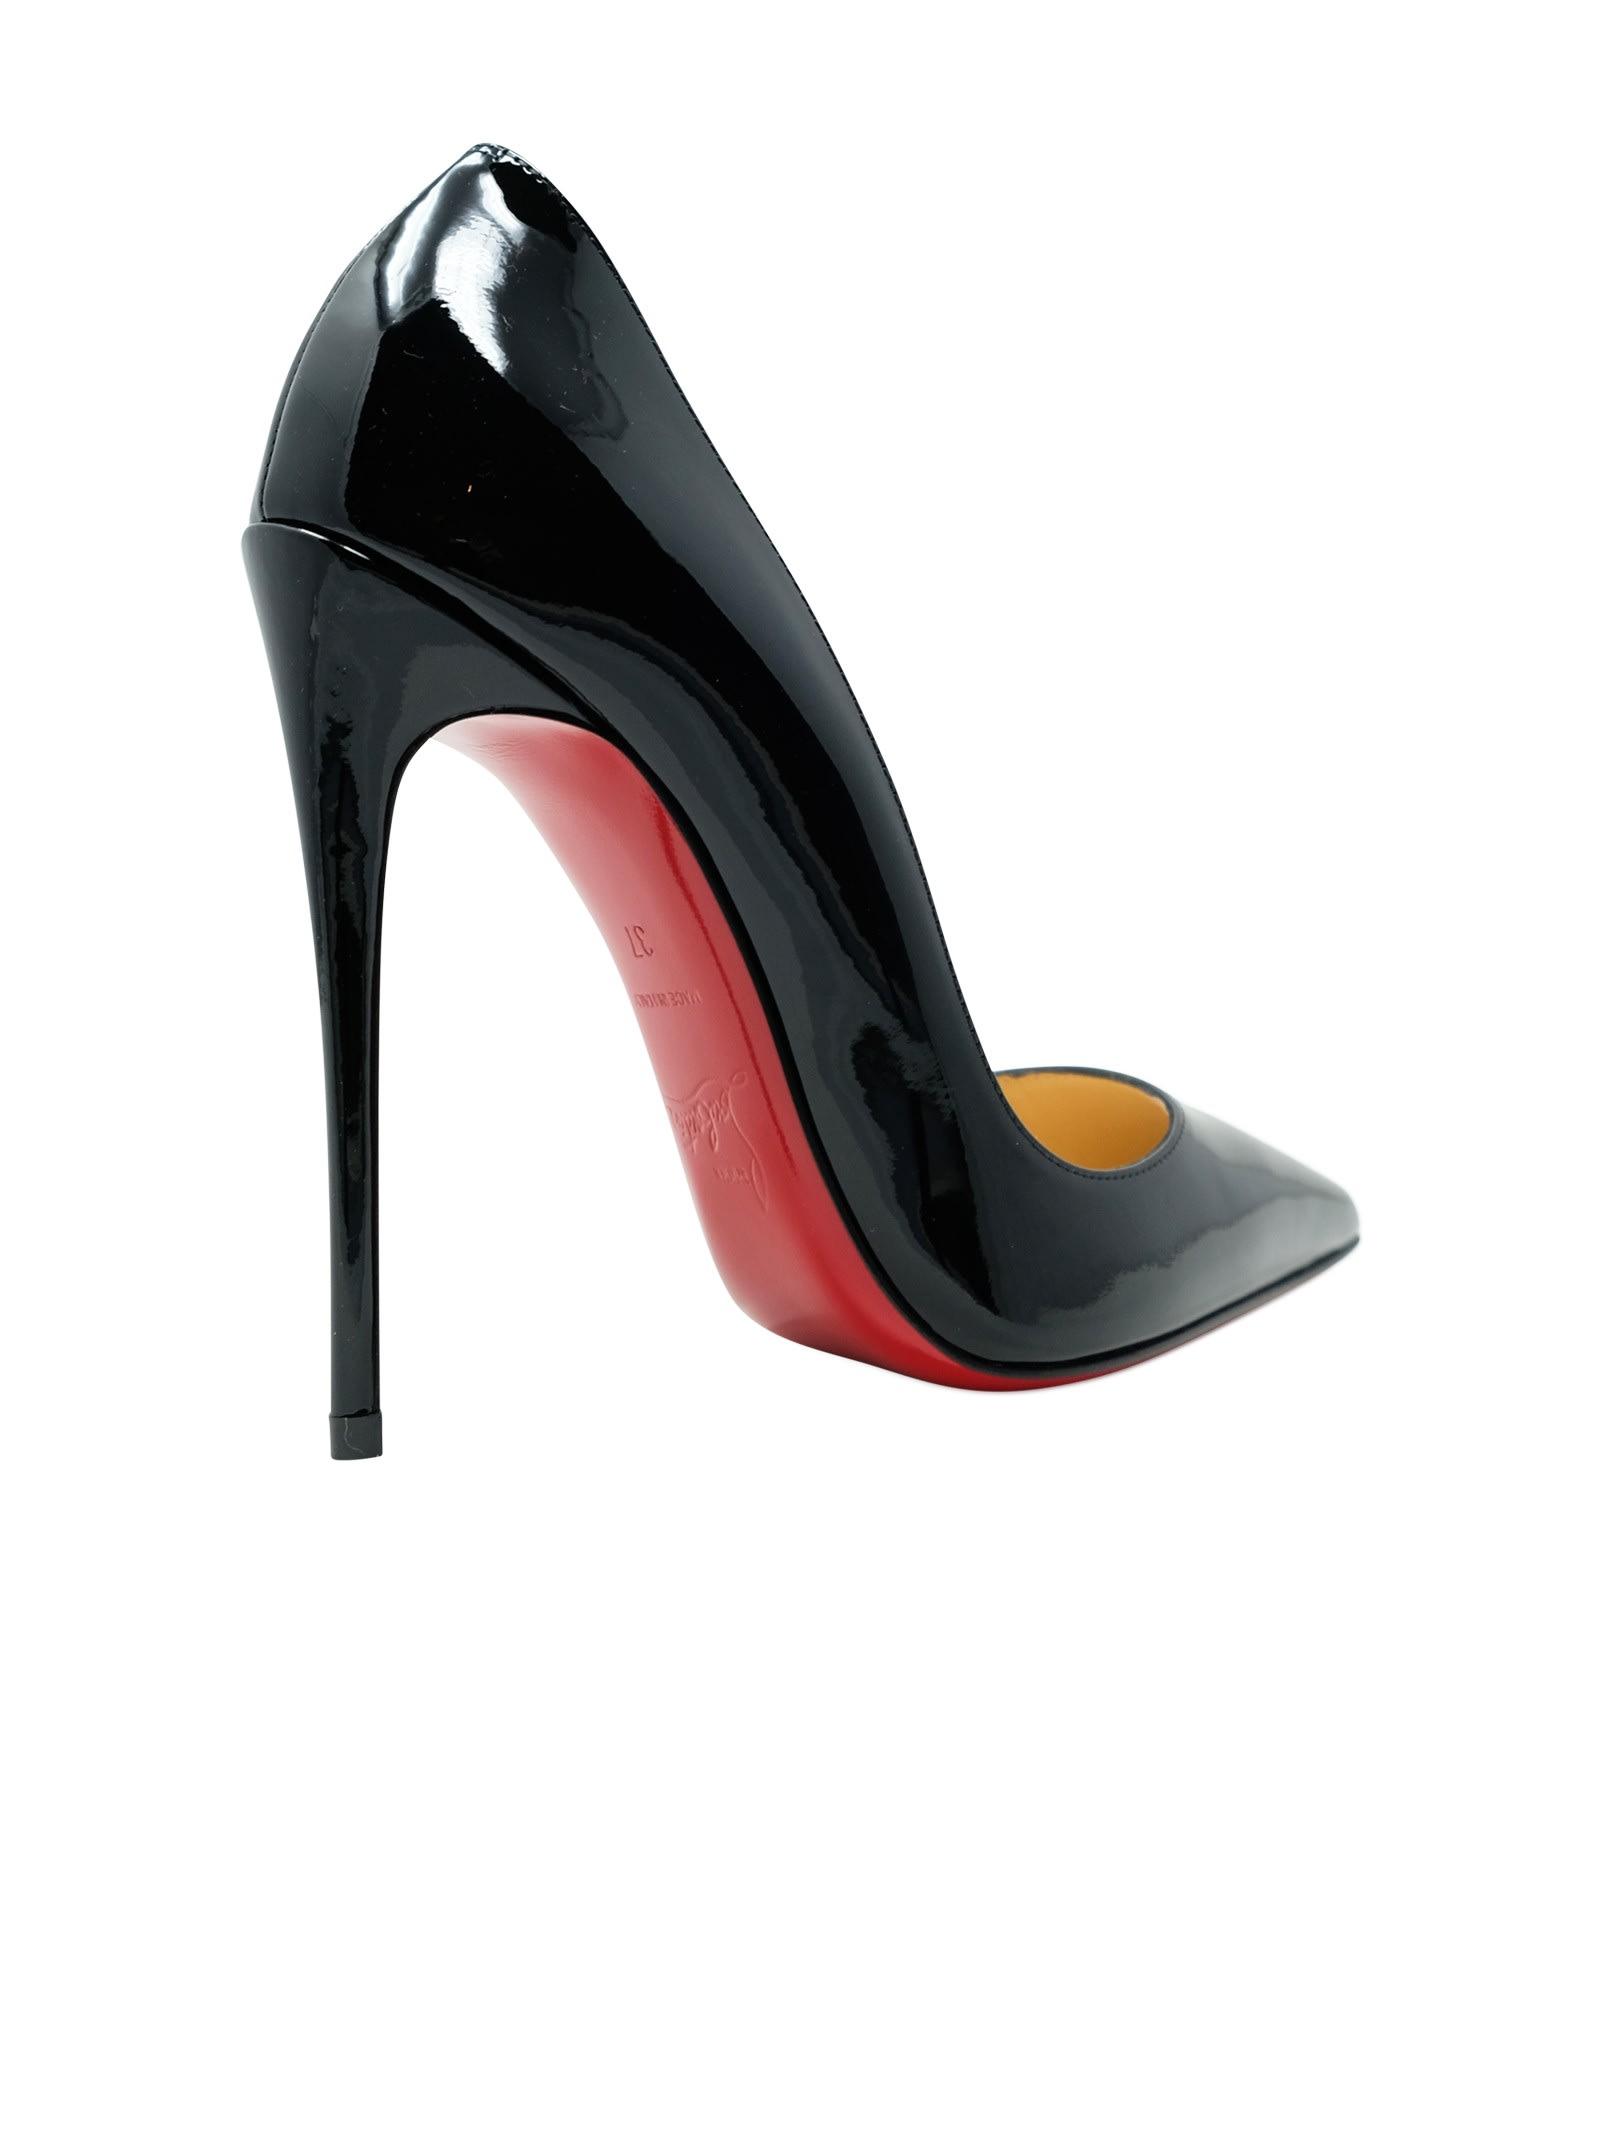 Christian Louboutin So Kate Patent Leather Pumps 120 | Harrods US